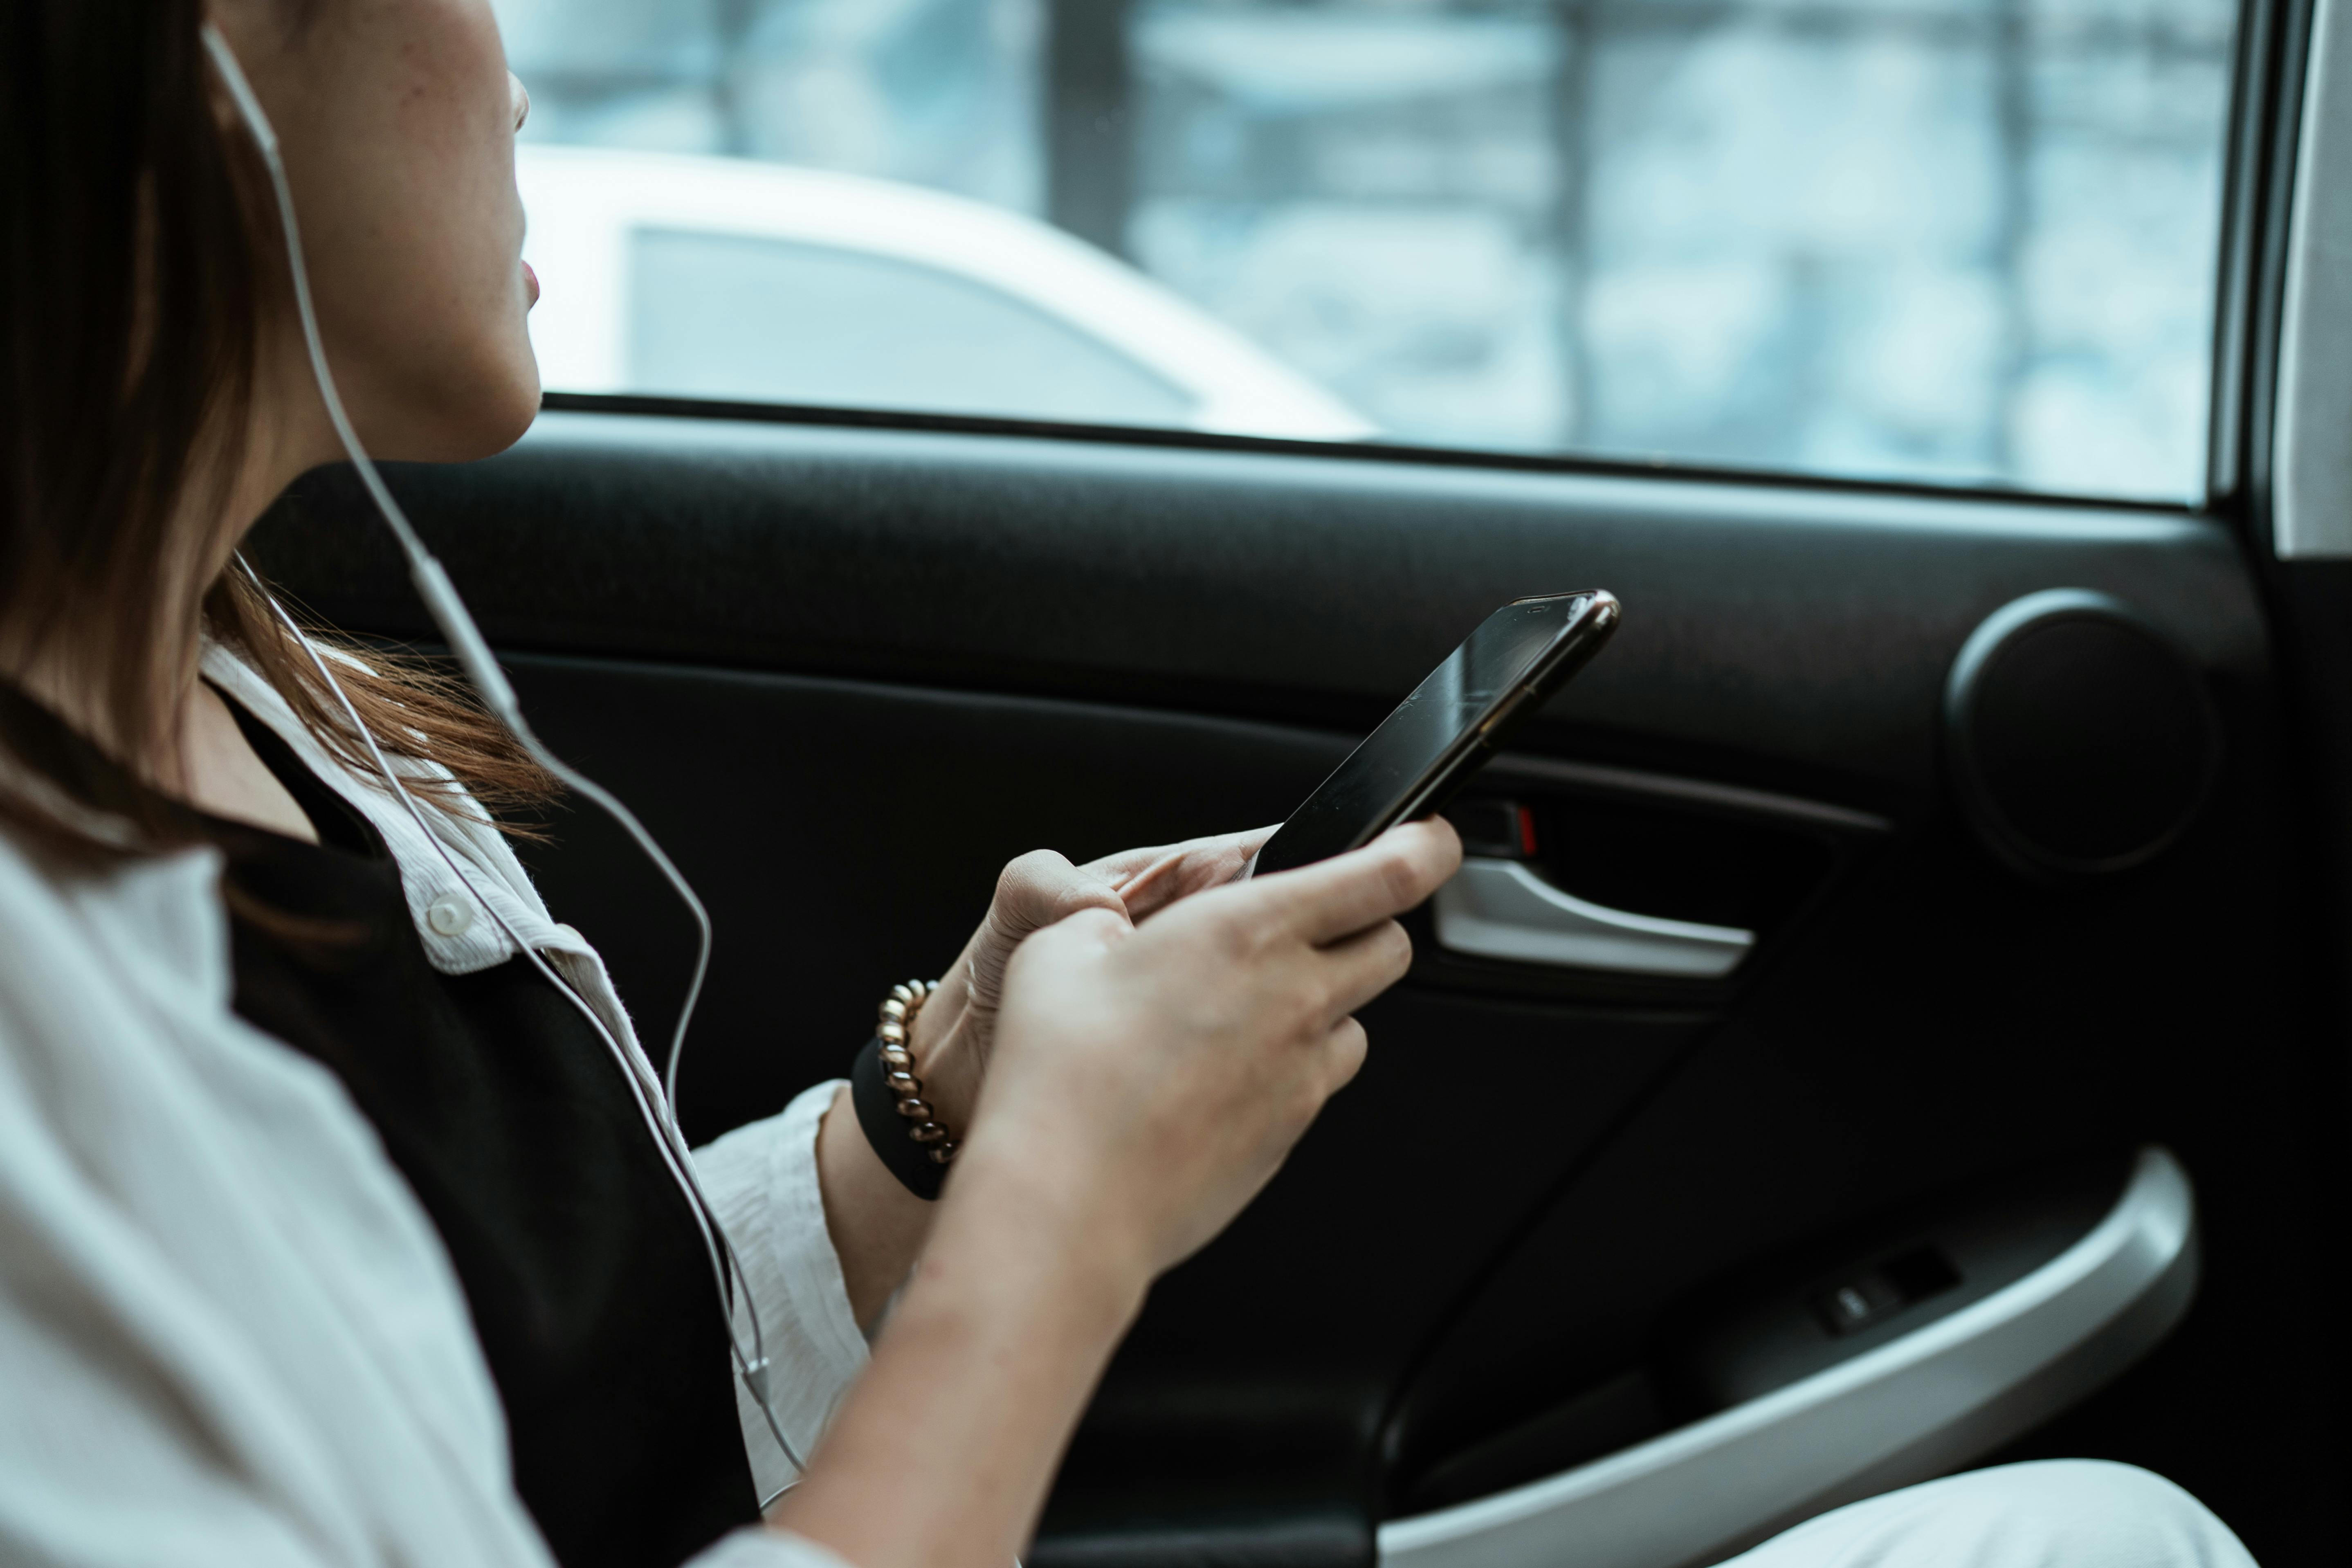 crop unrecognizable woman listening to music on smartphone in car